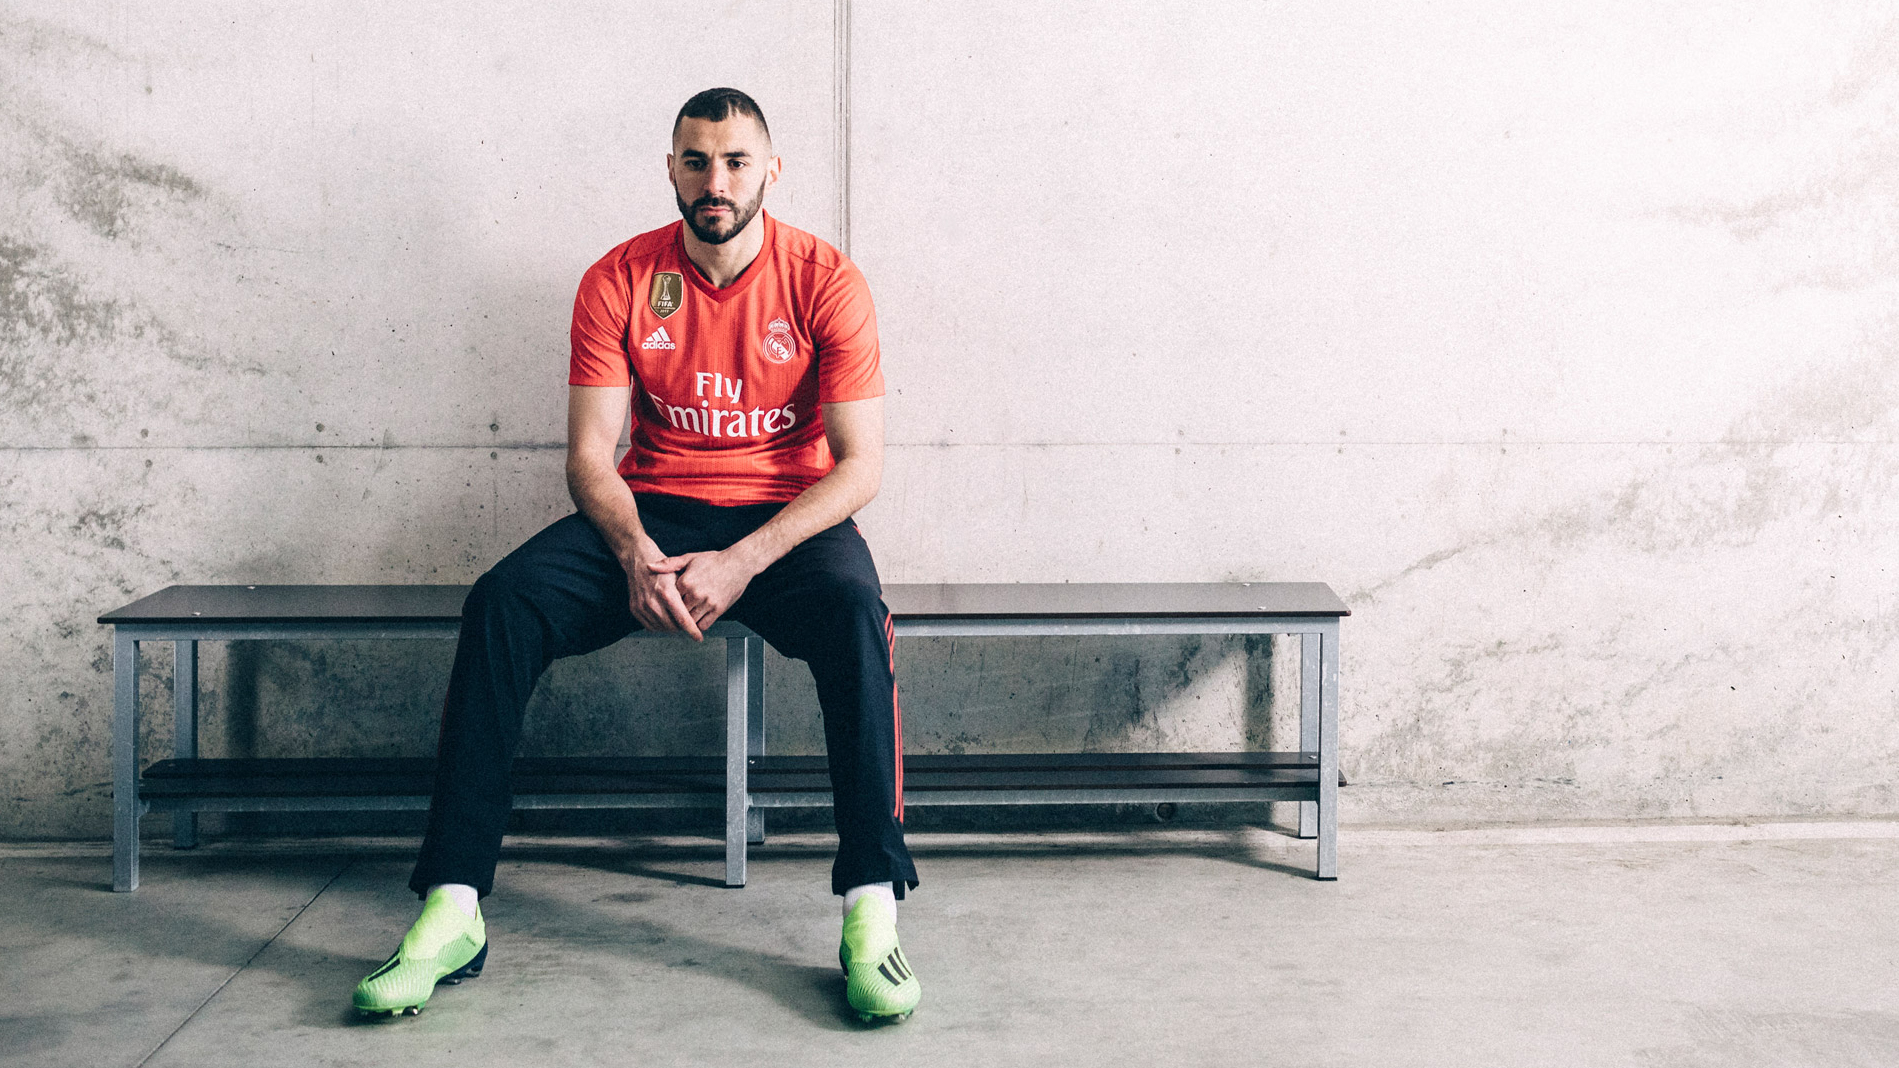 Adidas ocean plastic for coral-coloured Madrid kits